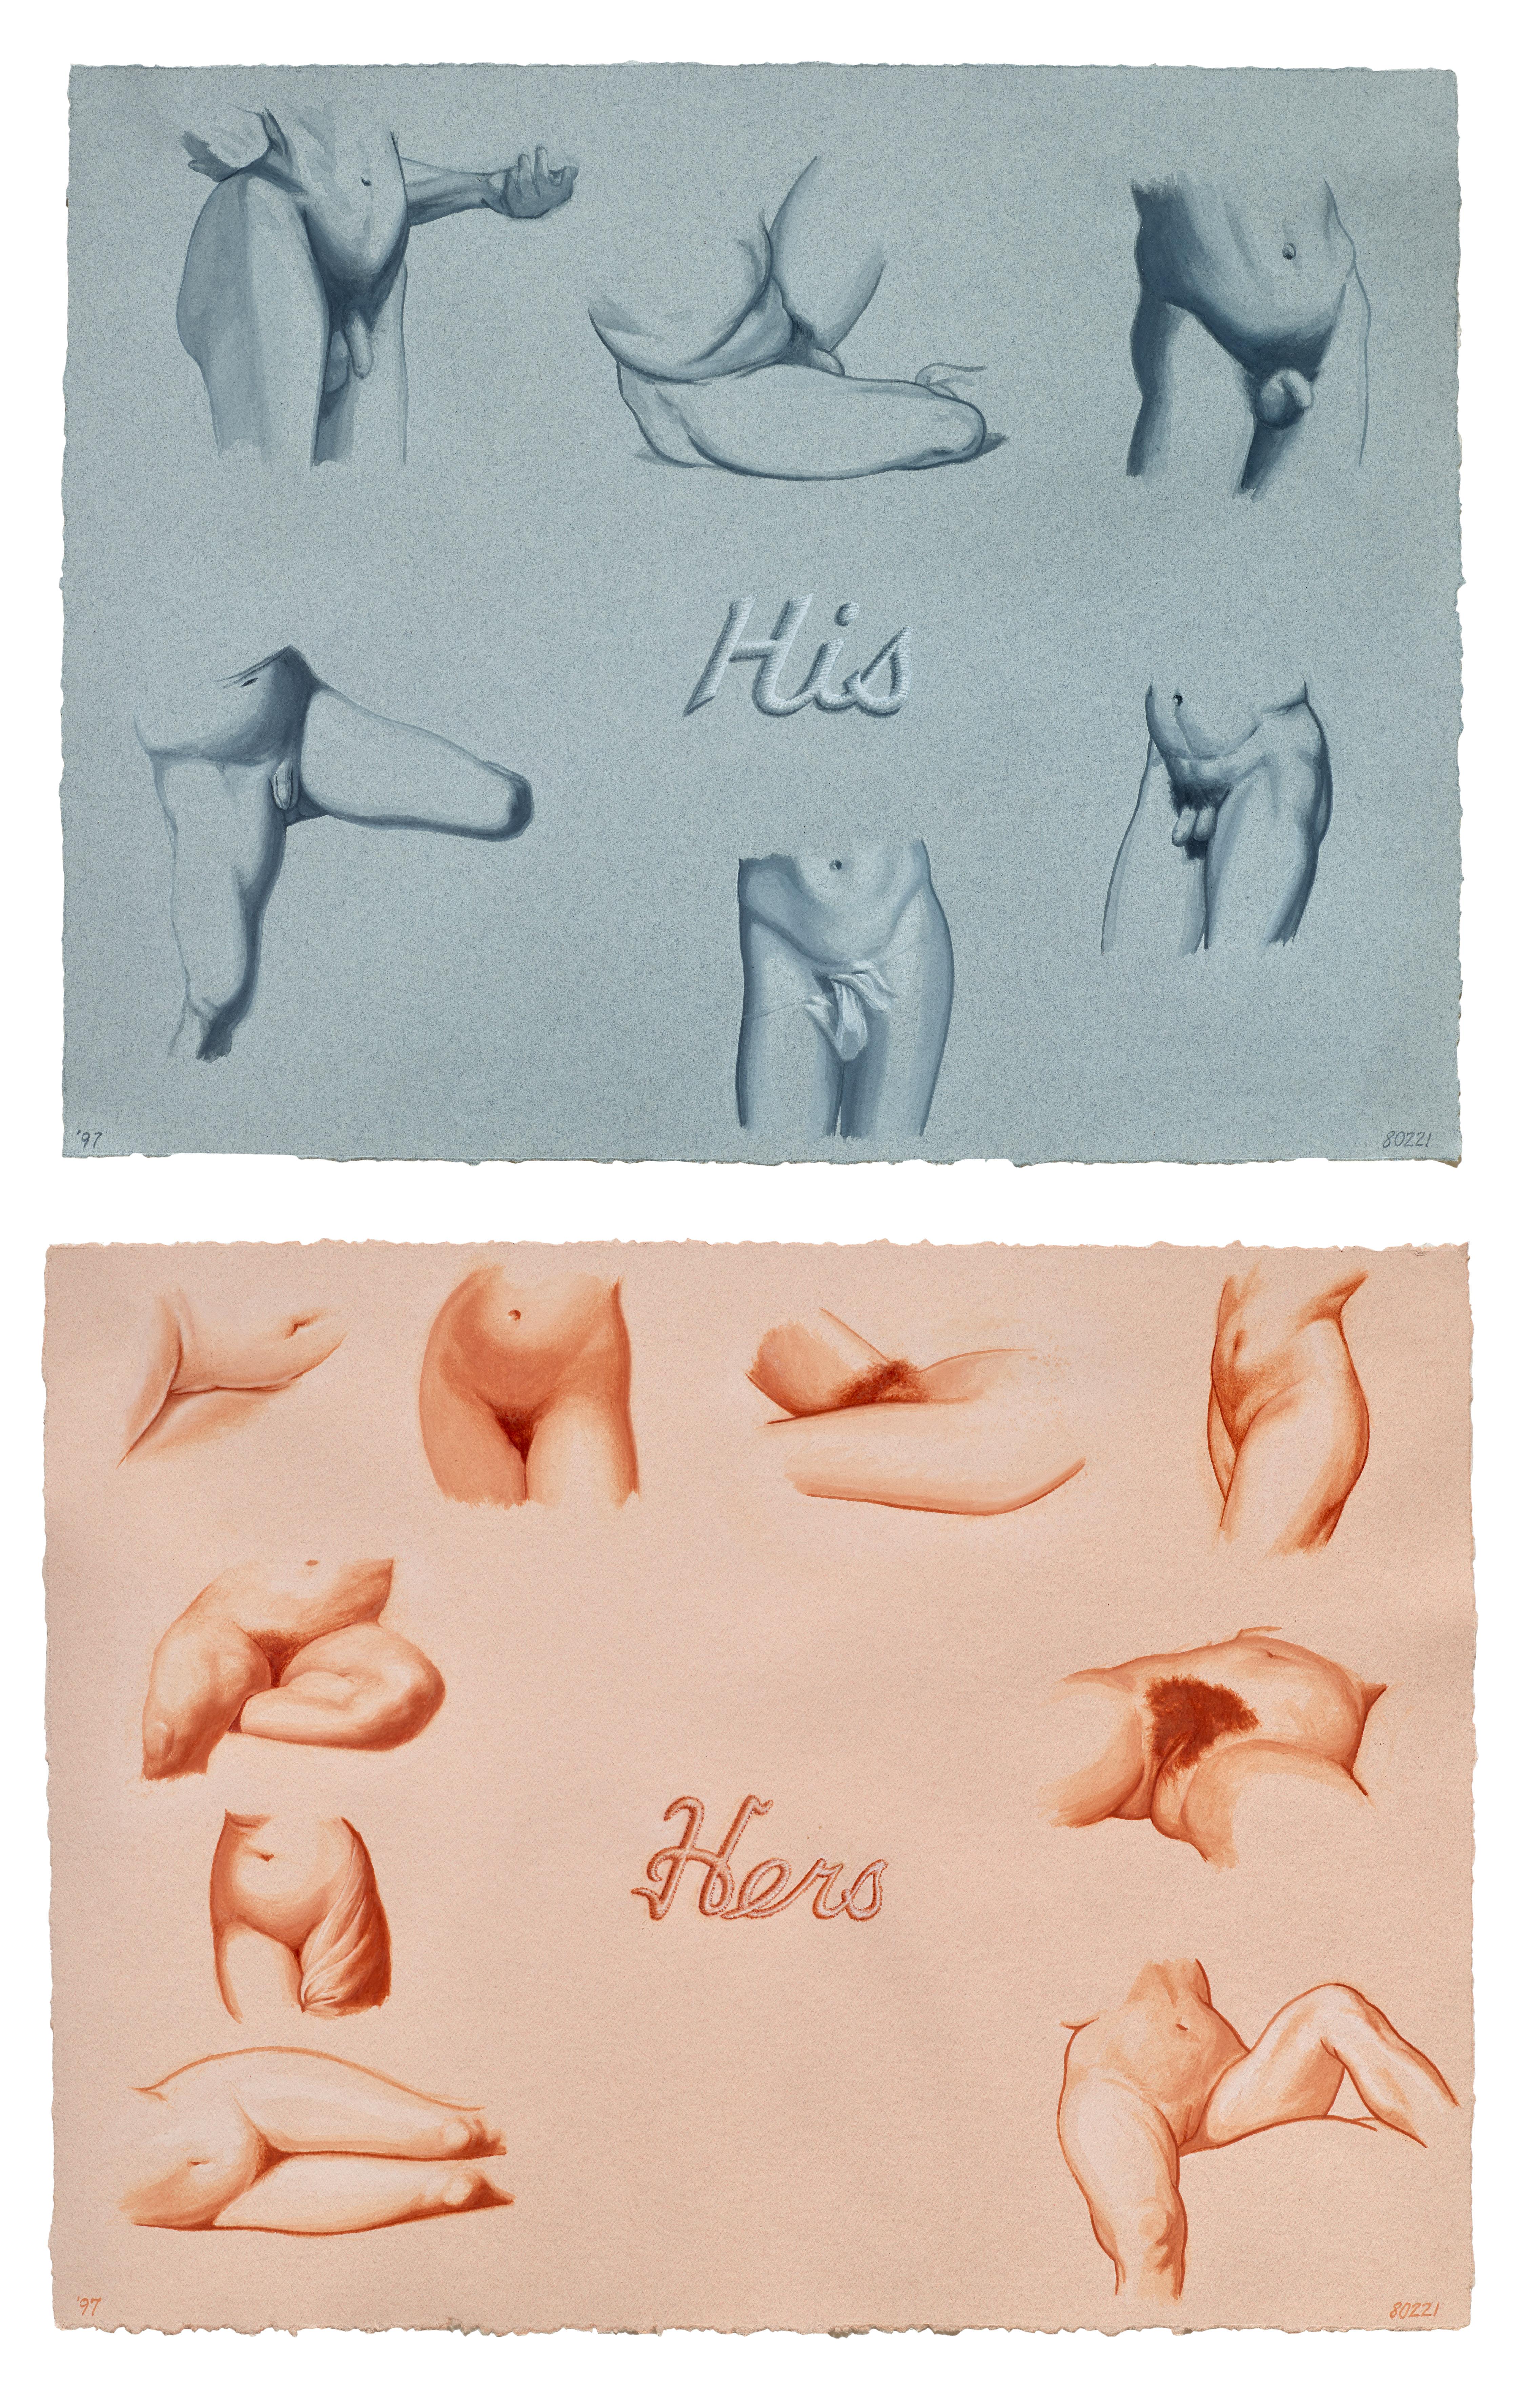 His / Hers - Art by Julie Bozzi